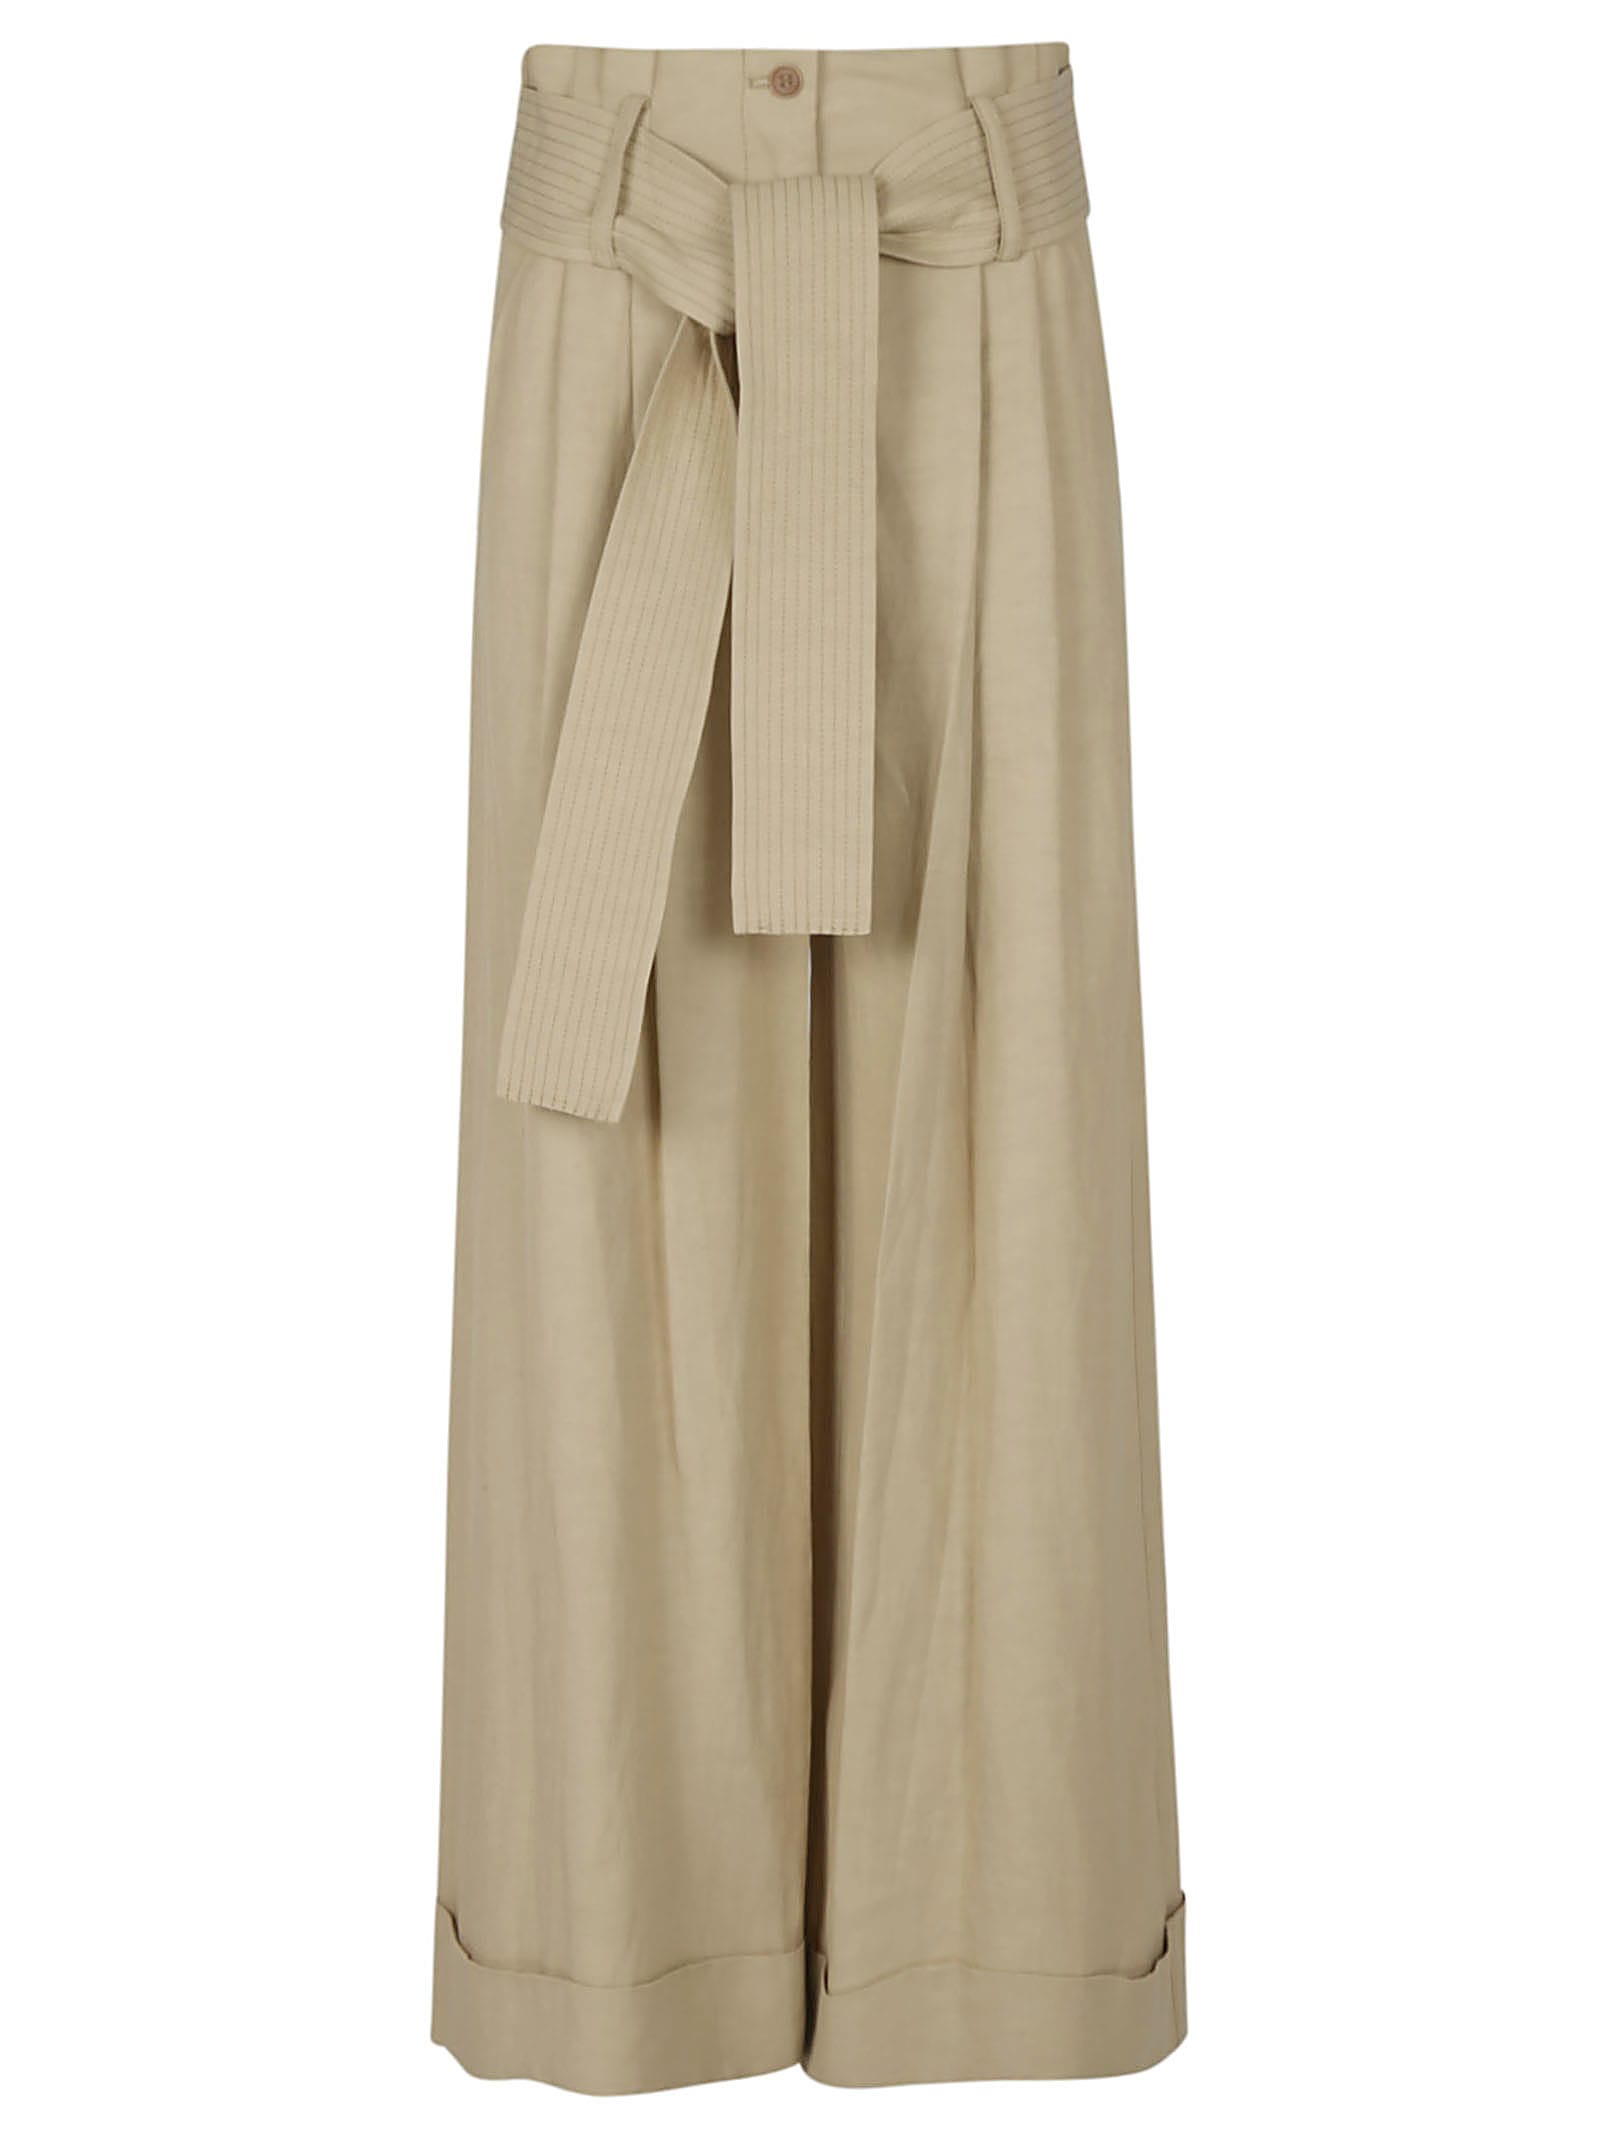 P.A.R.O.S.H STRAIGHT LEG BELTED TROUSERS,RAISAD231433 004 BEIGE